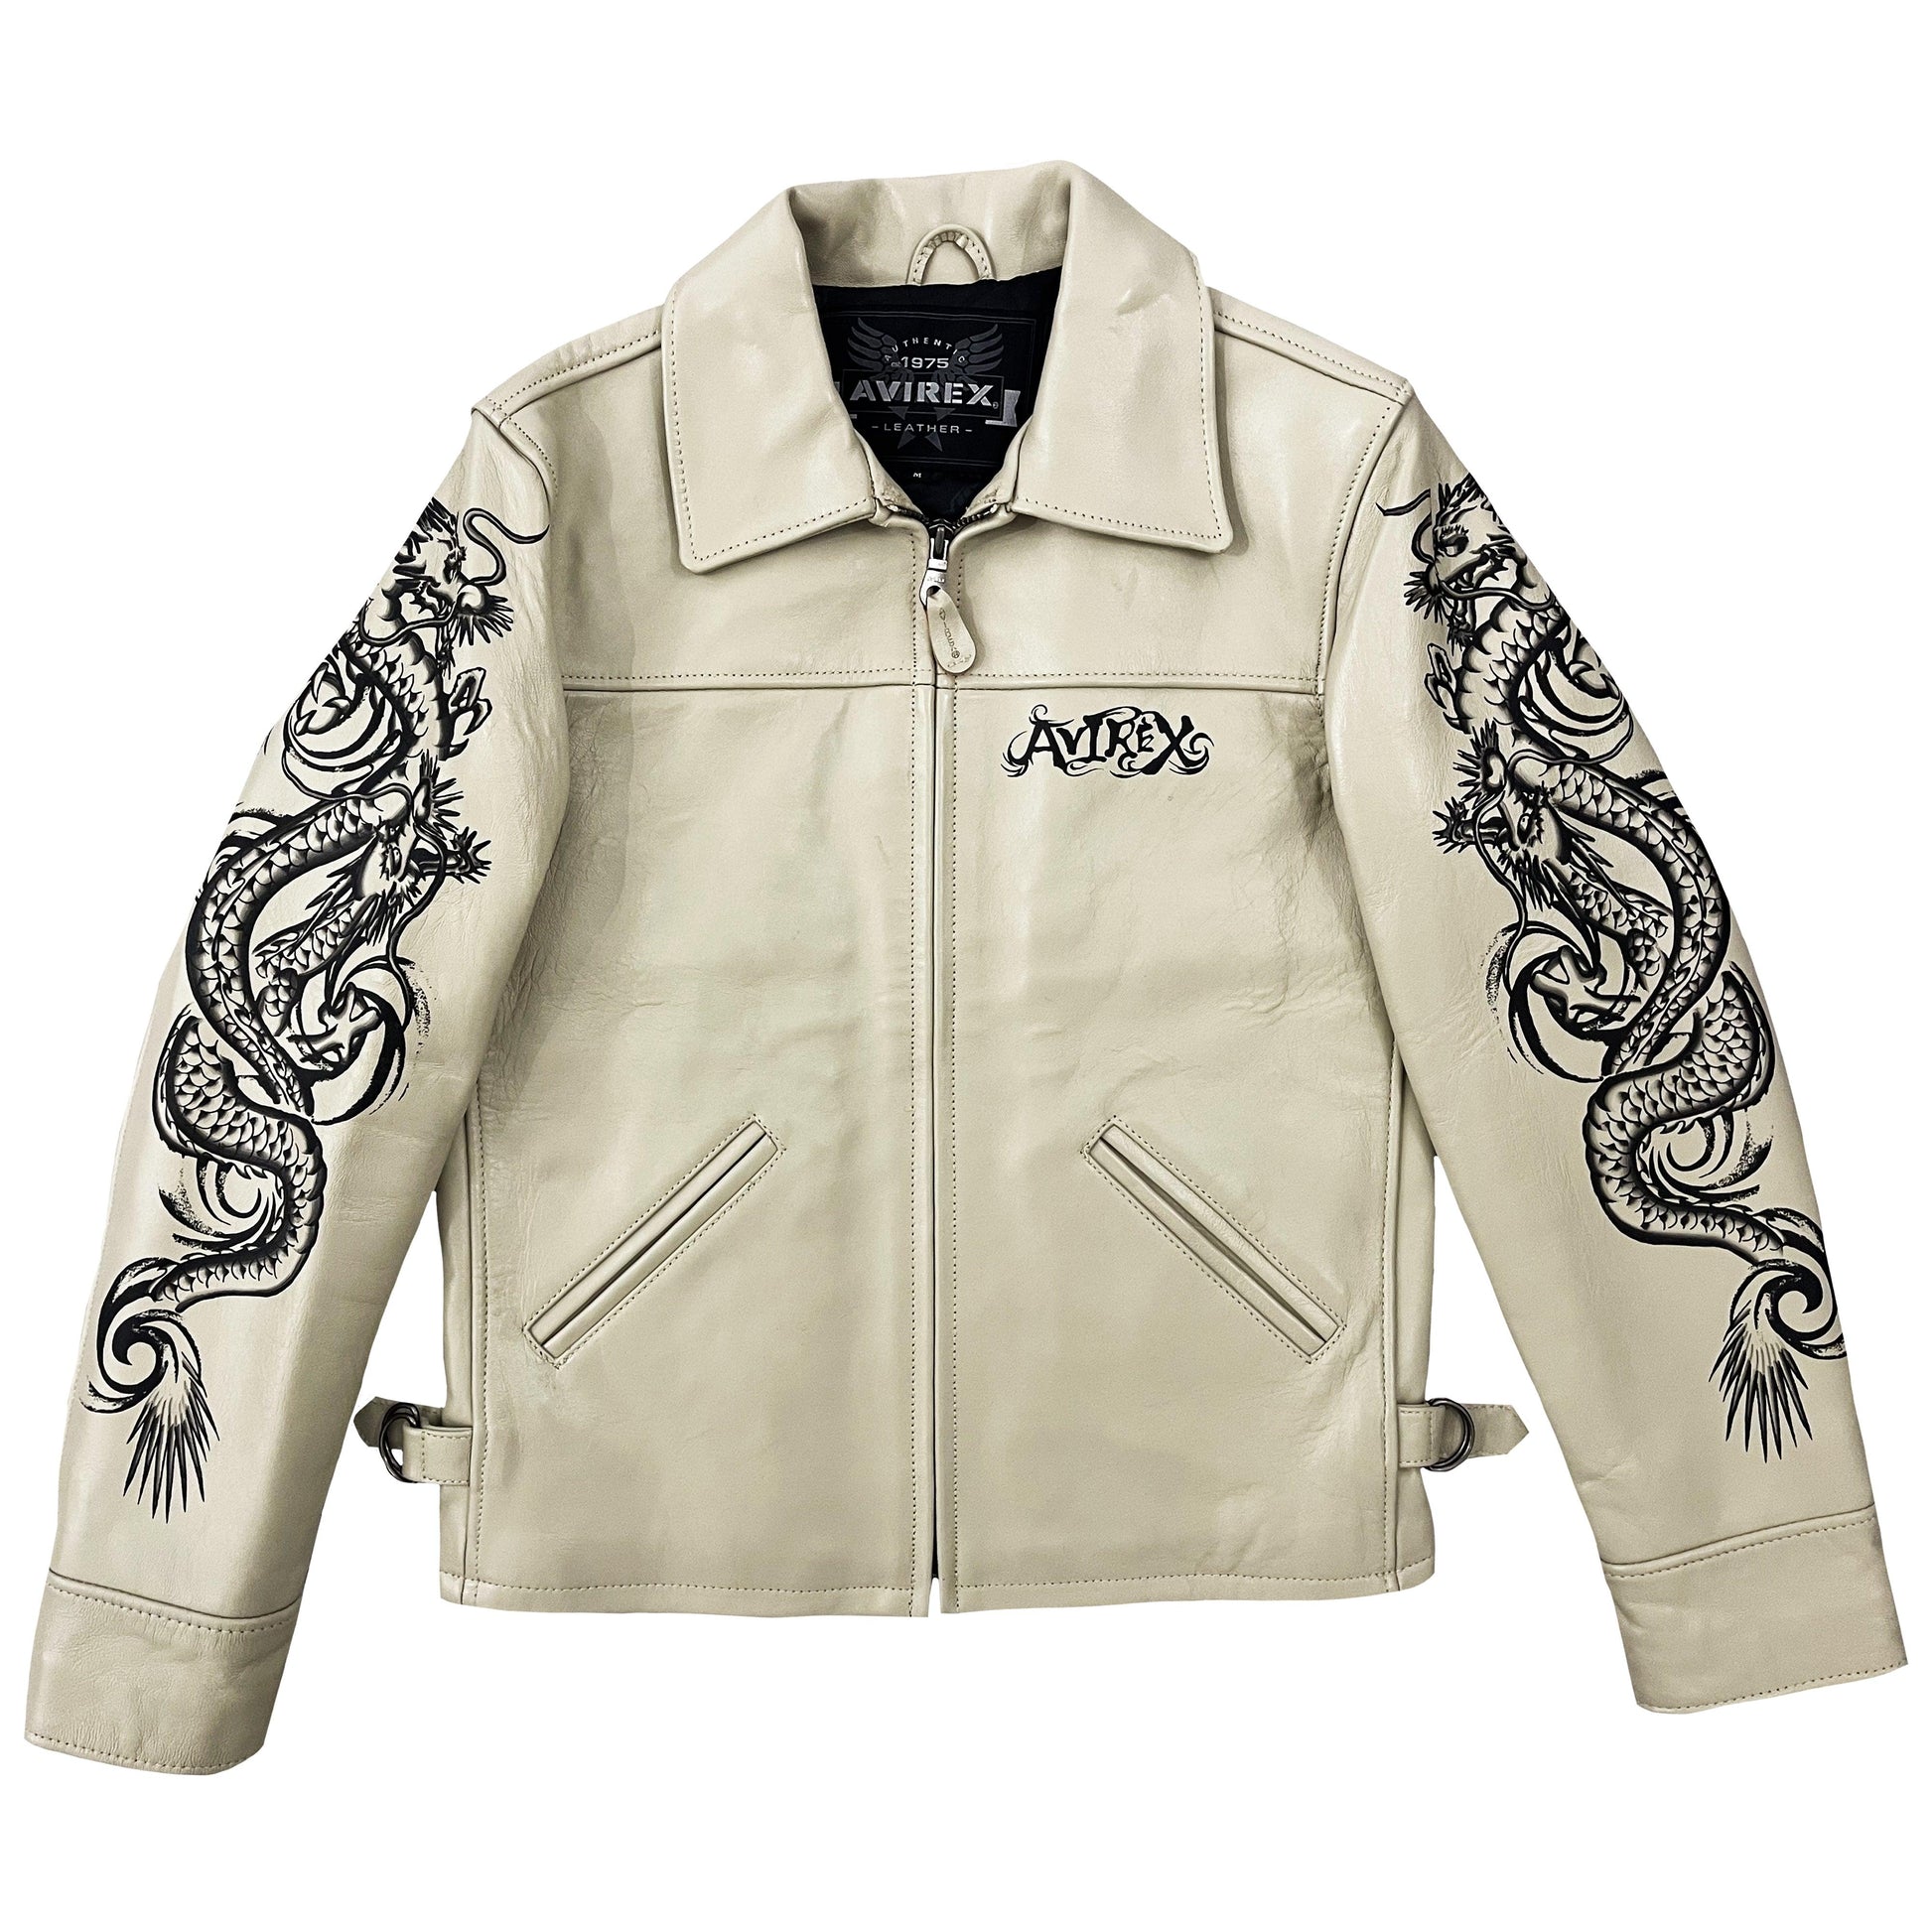 Avirex Leather Dragon Painted Jacket - Known Source